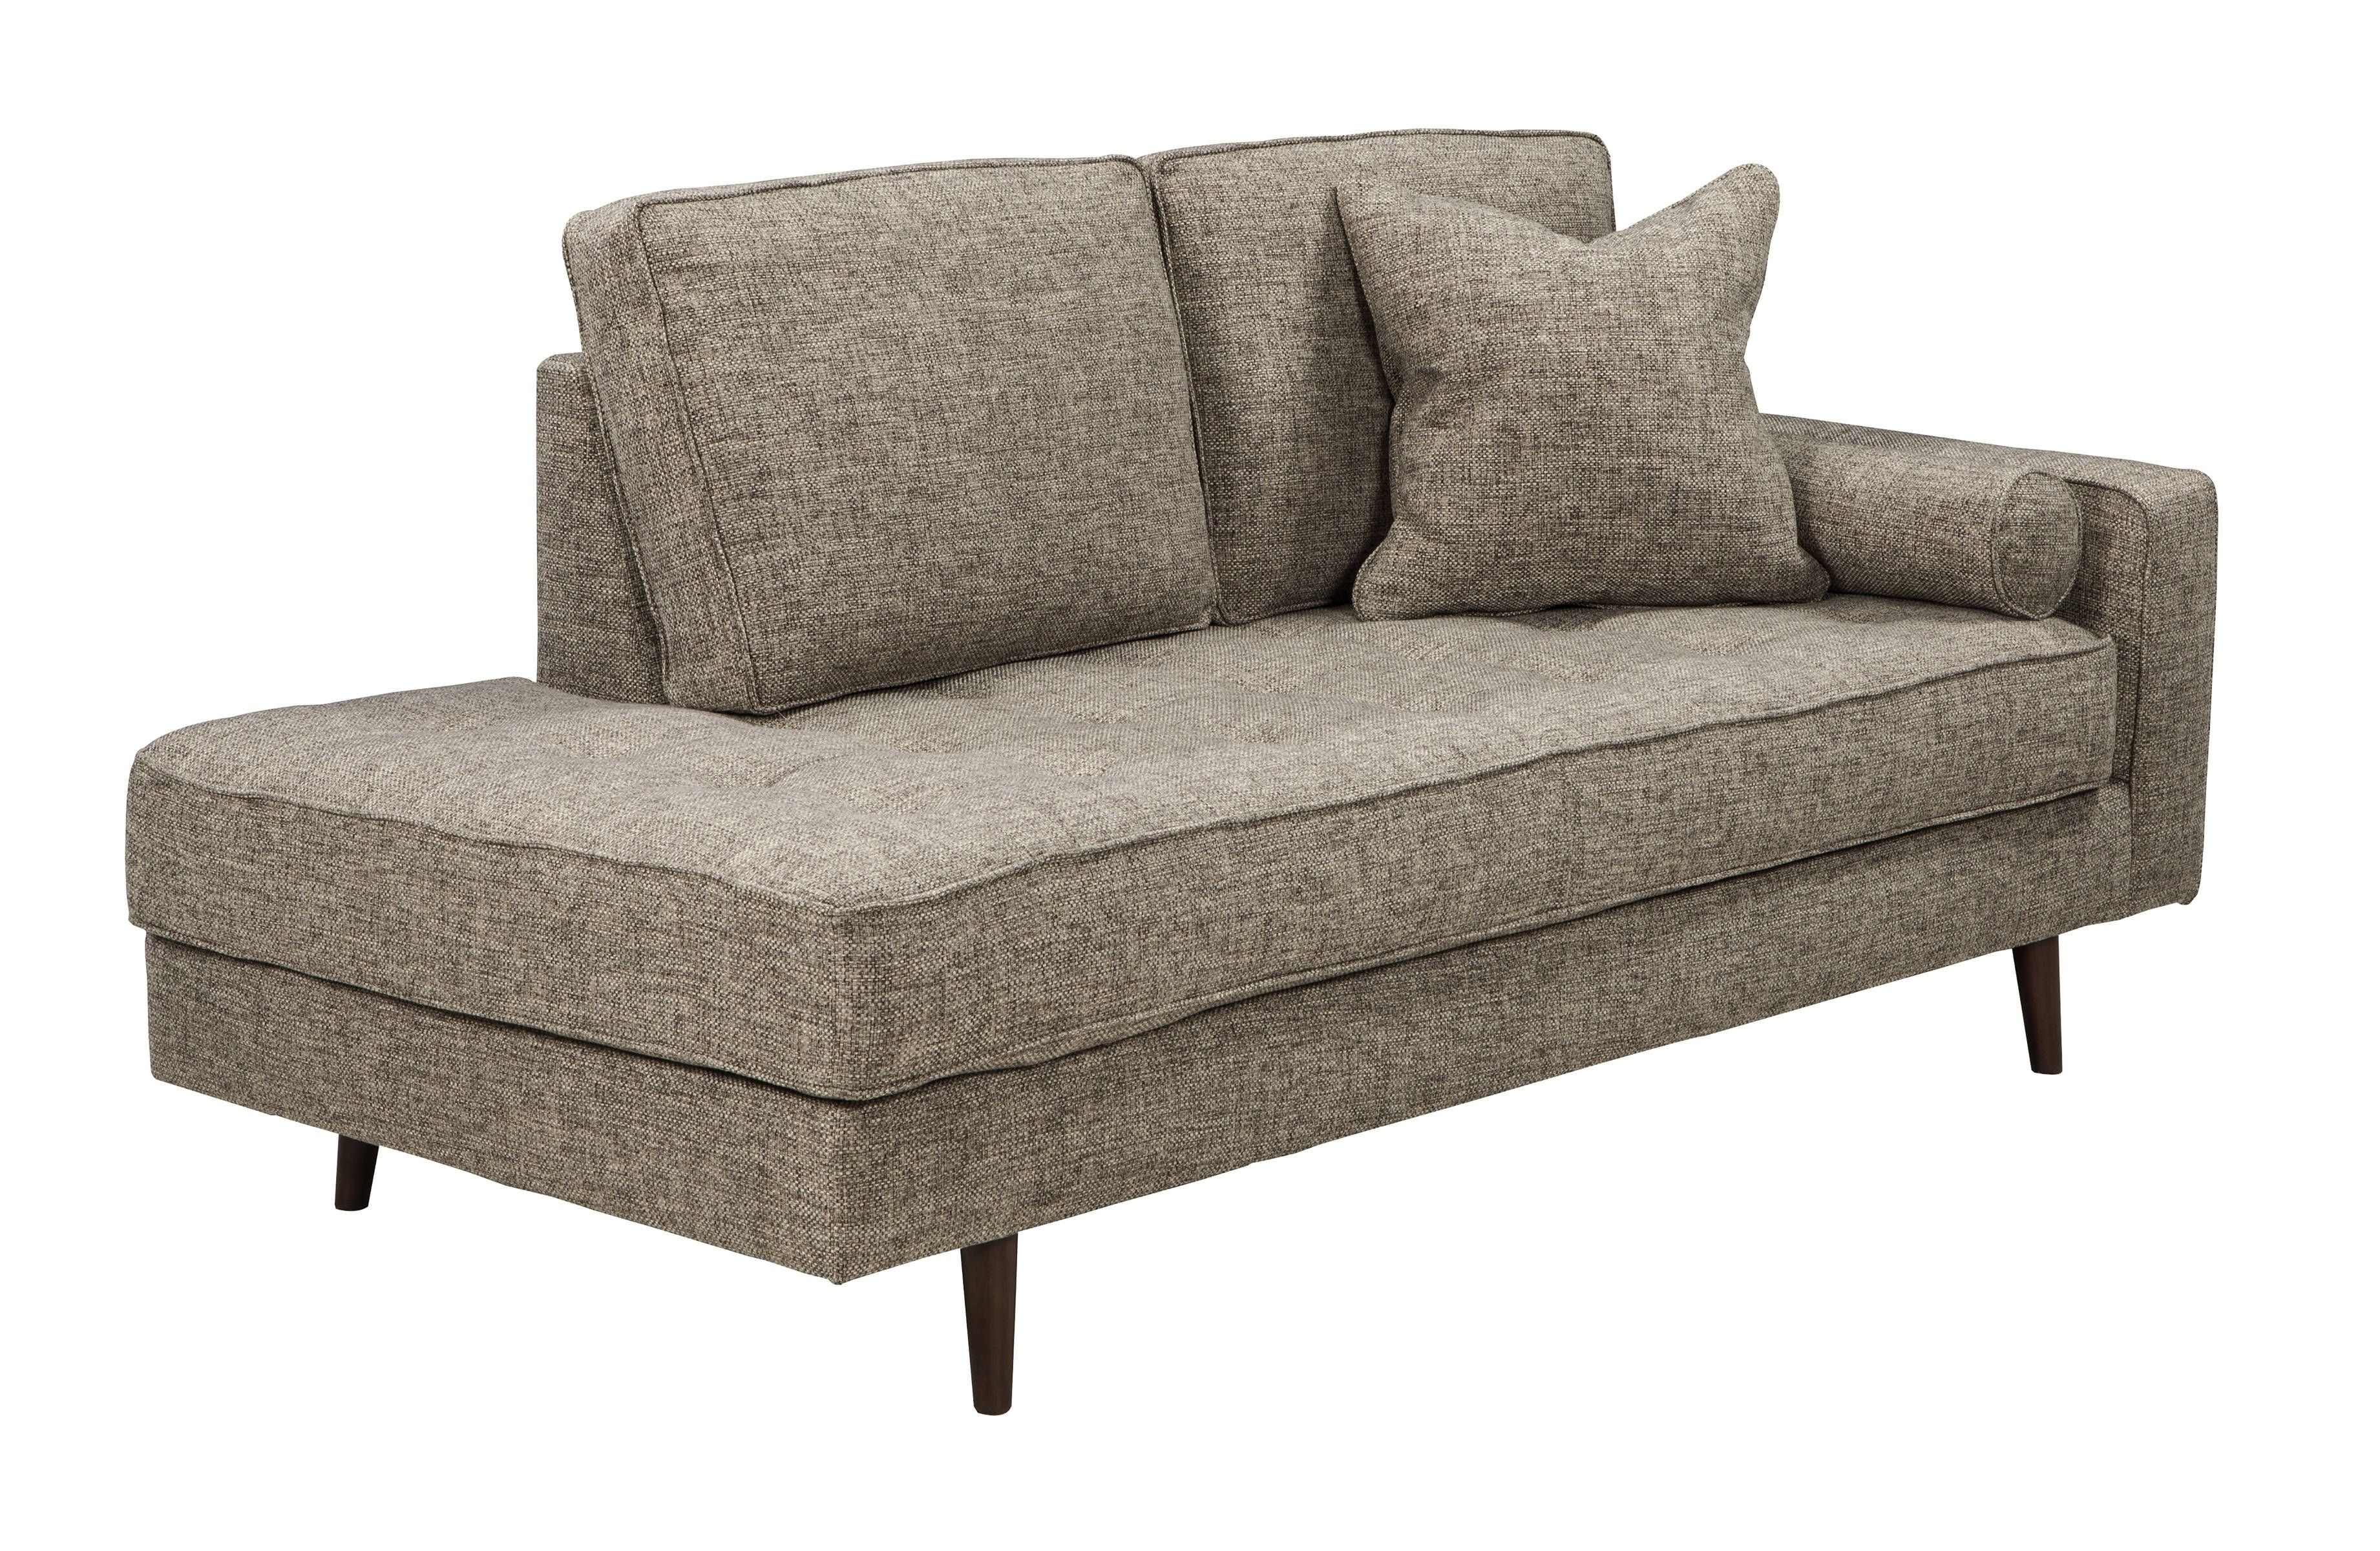 Ashley Furniture Chento Jute Raf Corner Chaise | The Classy Home With Regard To Lucy Dark Grey 2 Piece Sectionals With Raf Chaise (View 17 of 30)